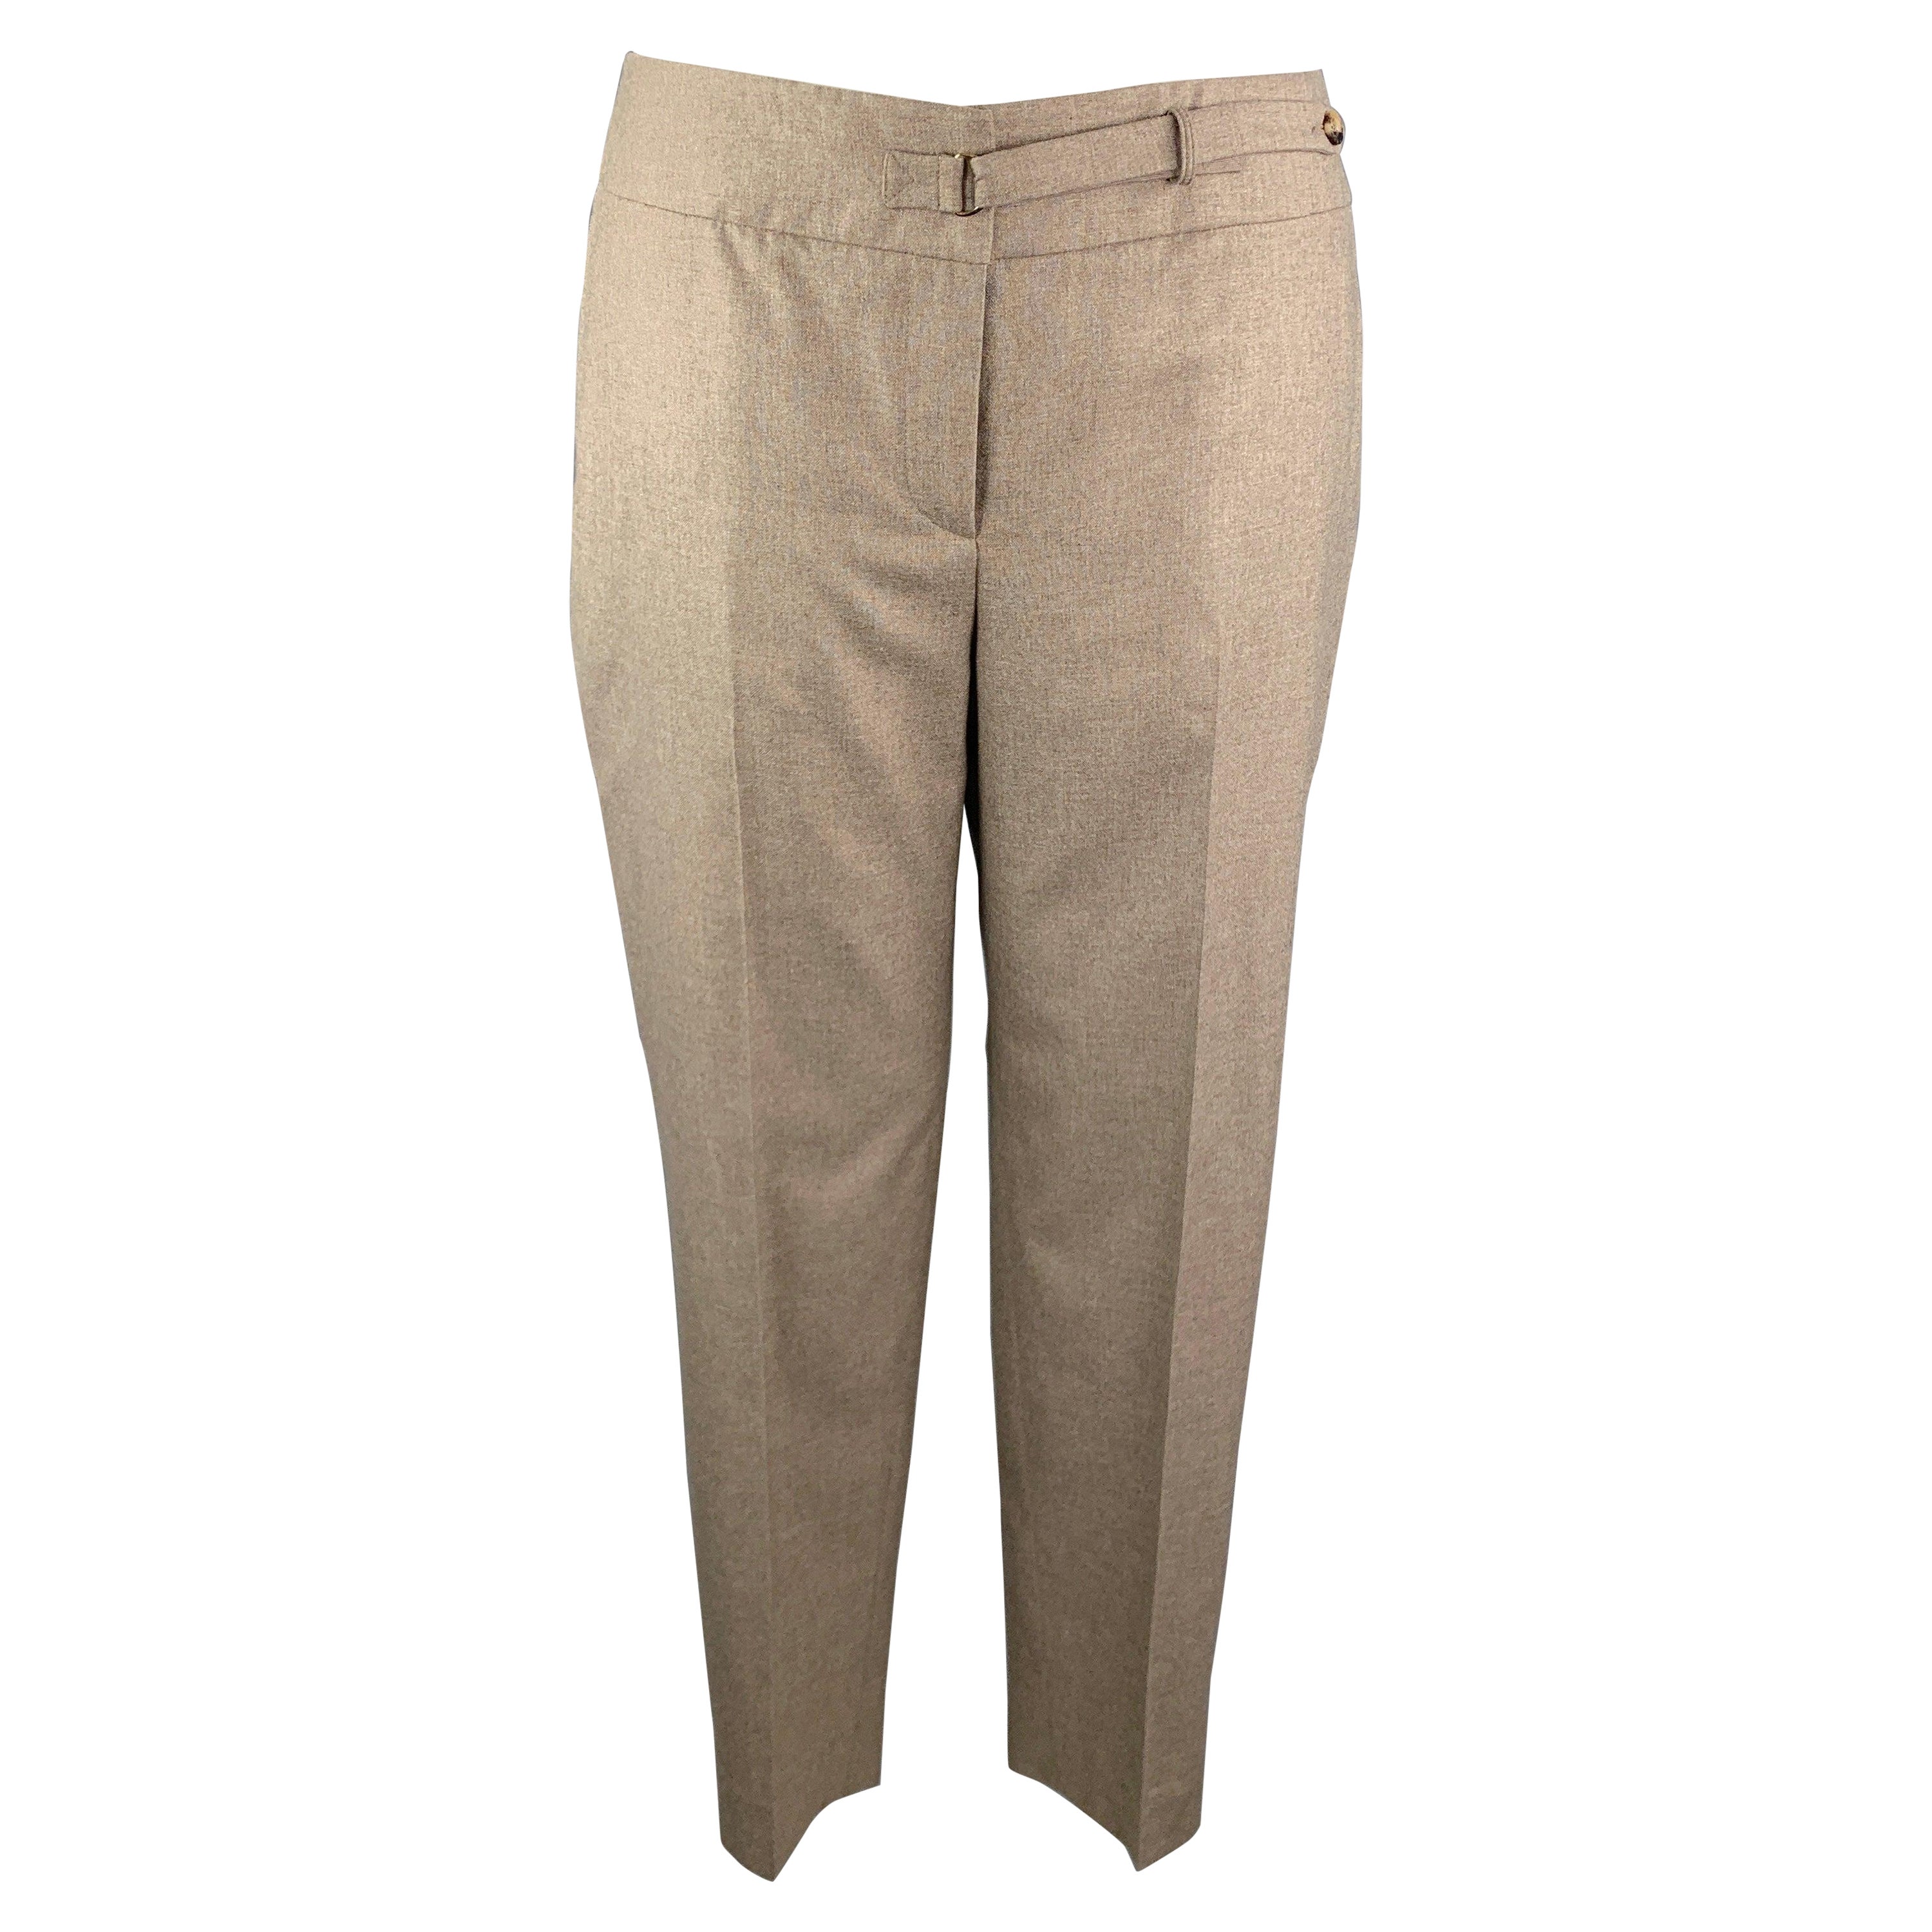 GIORGIO ARMANI Size 14 Taupe Silk / Cashmere Front Tab Dress Pants For Sale